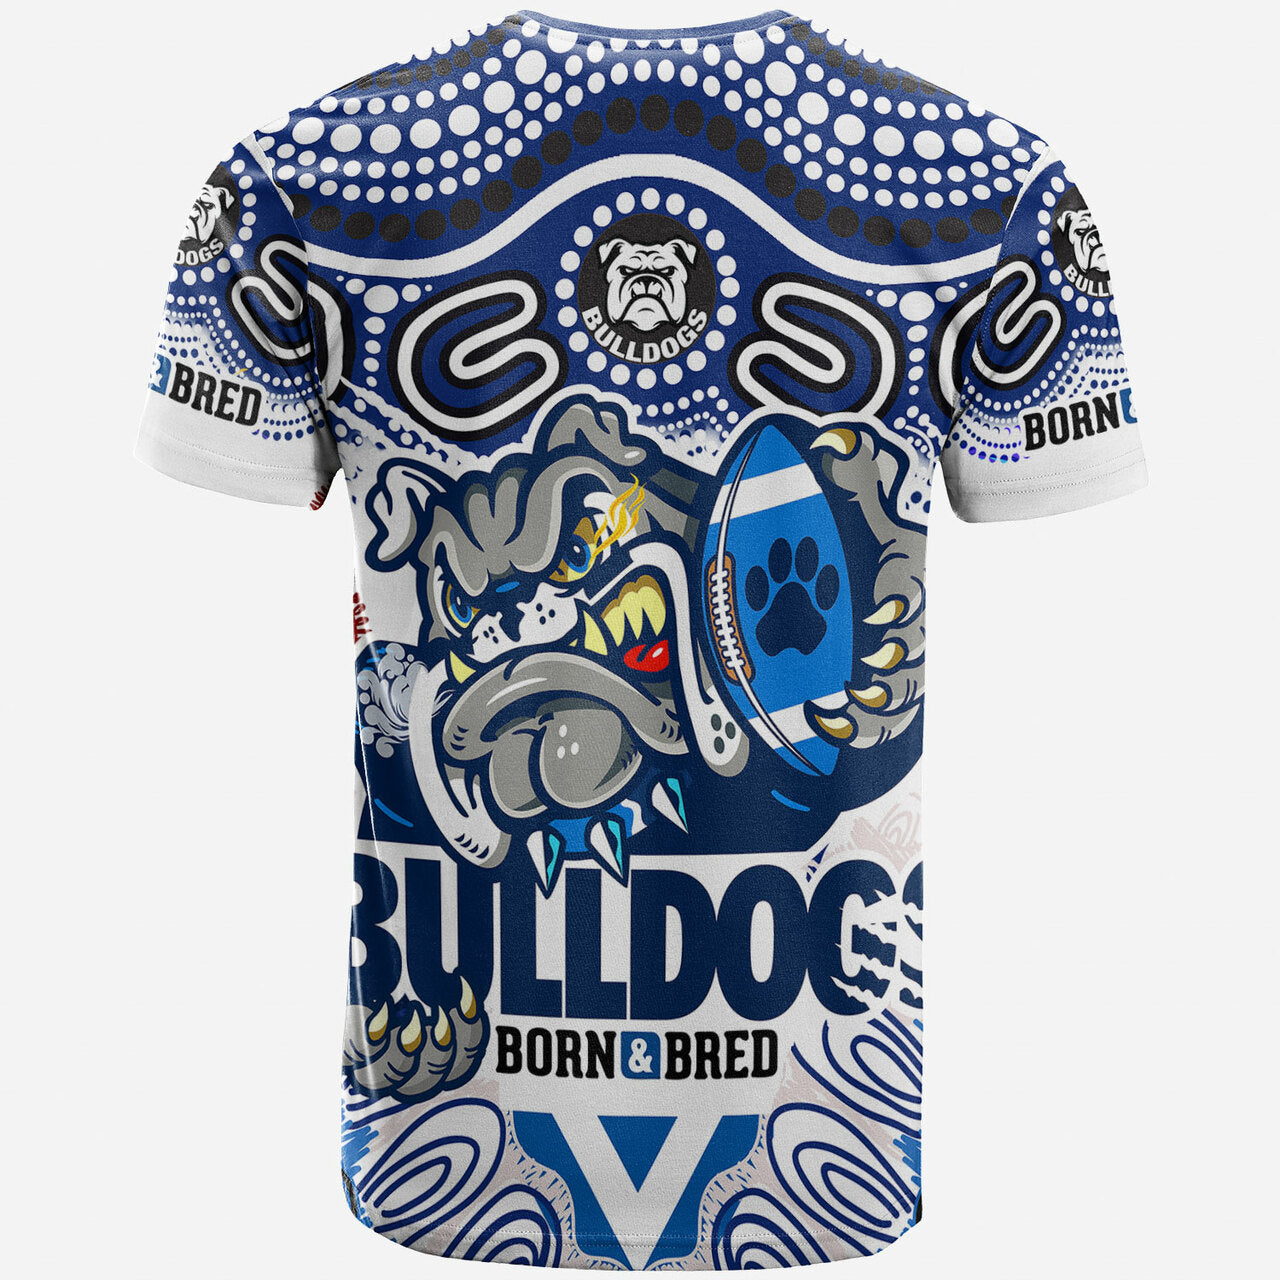 https-aussievibes-co-bulldogs-rugby-born-bred-t-shirt-custom-indigenous-bulldogs-with-rugby-ball-and-aboriginal-patterns